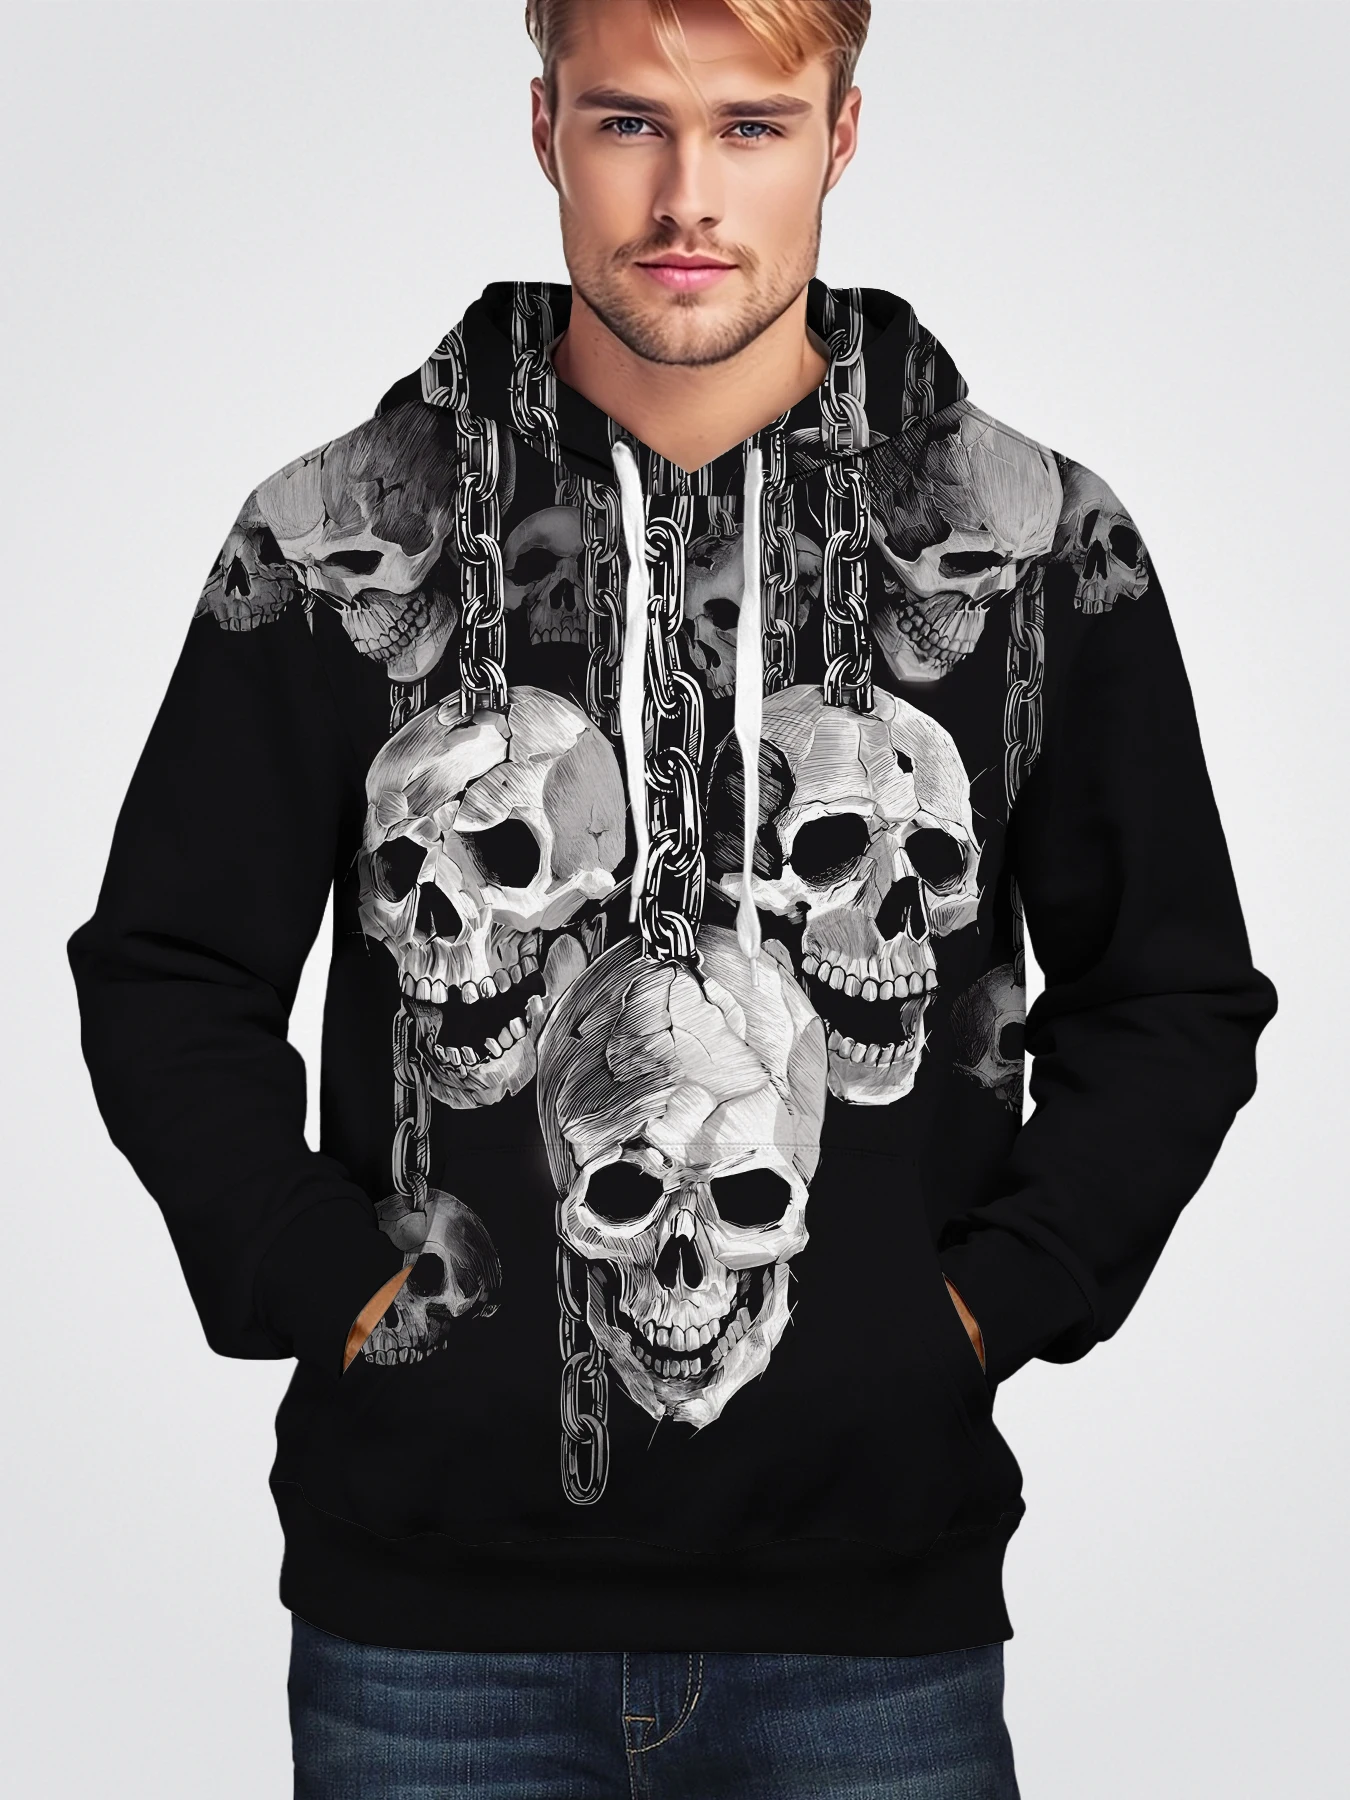 

Dark Chain Skull Men's Long Sleeve Hoodie 3D All Over Print Casual Spring Autumn Pullover Hooded Jumper Streetwear Punk Clothing